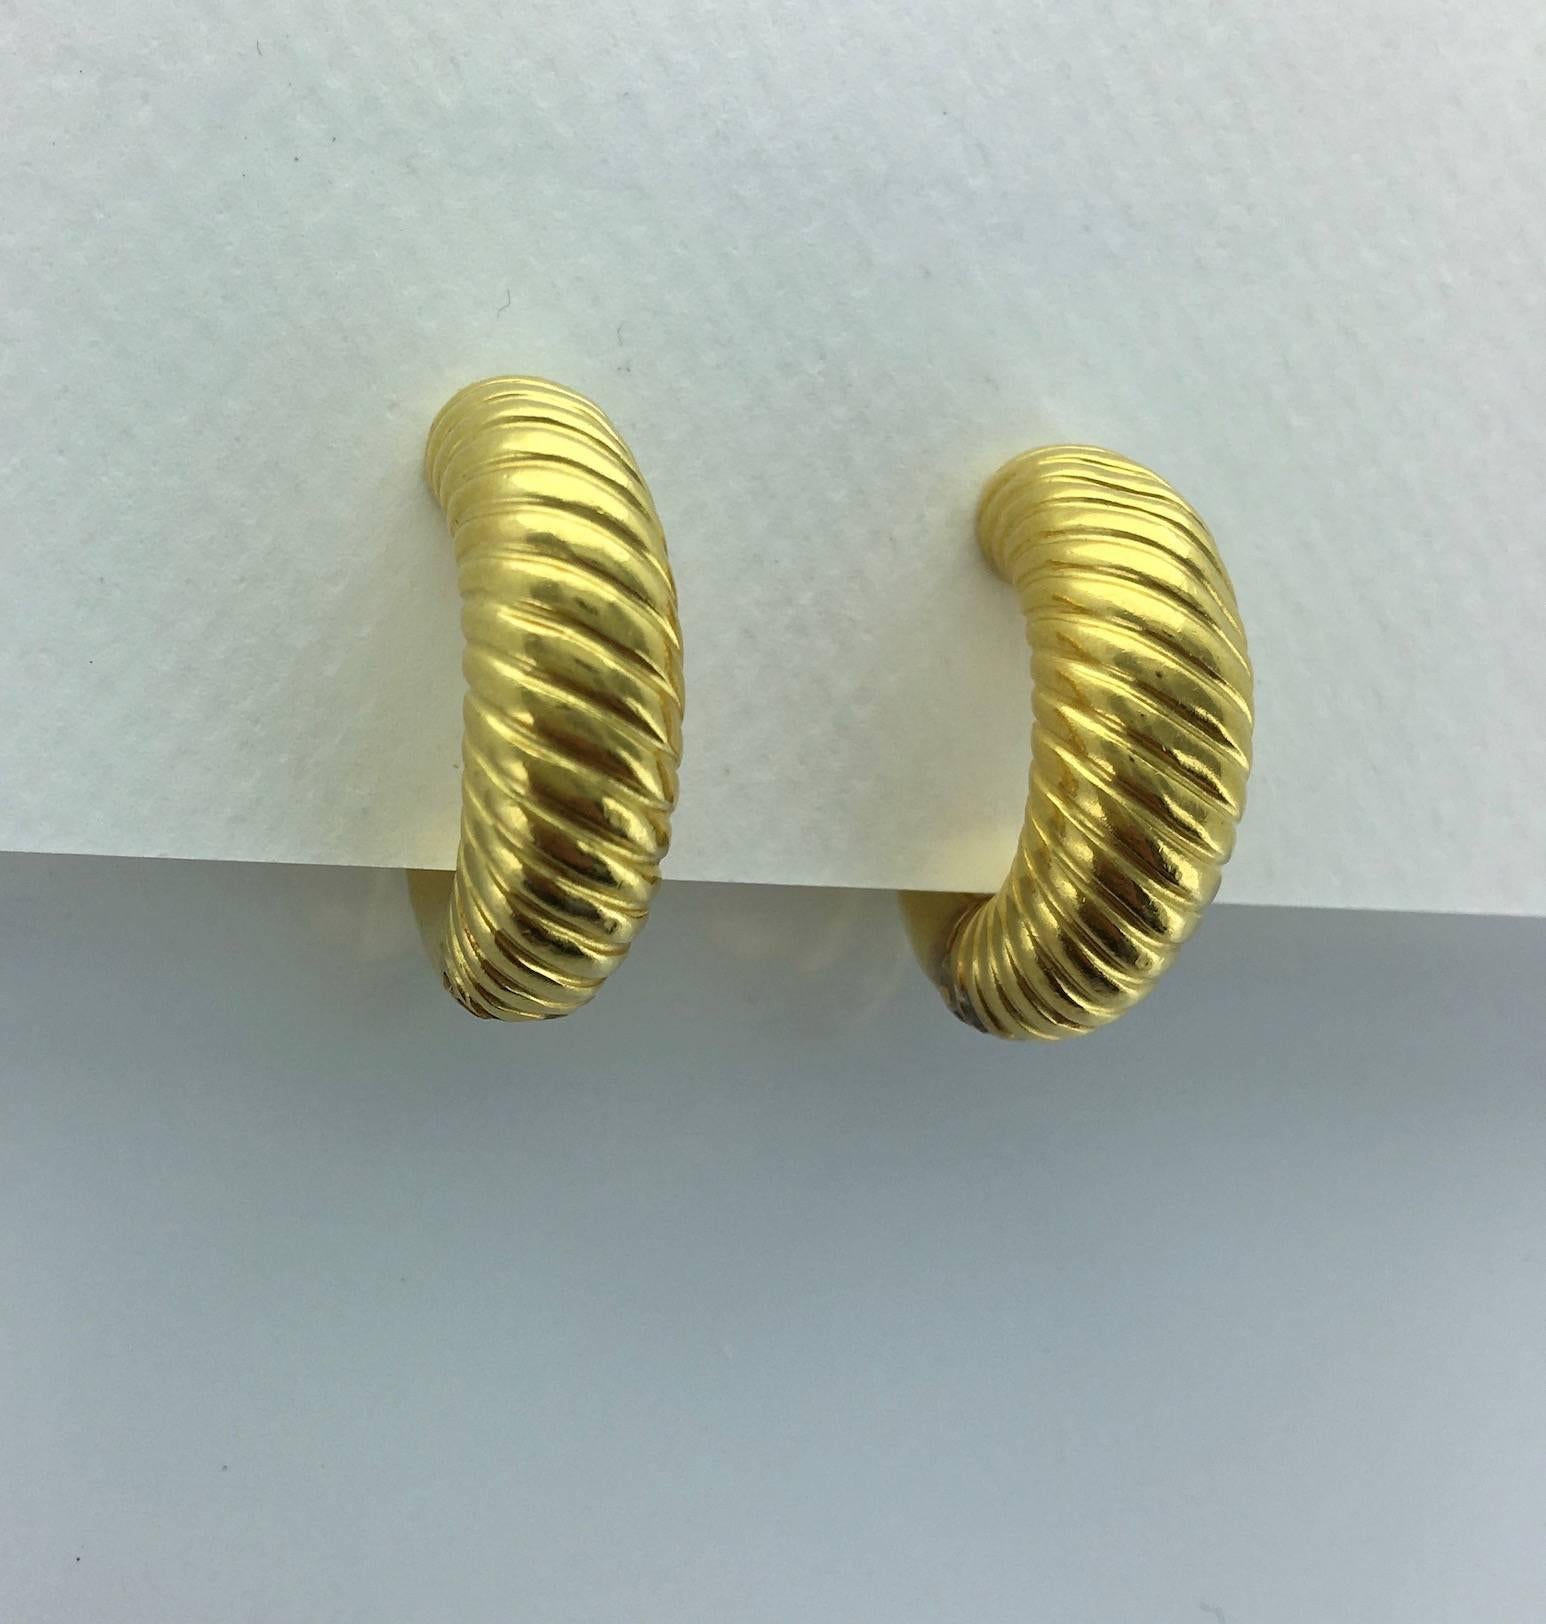 Wide hoop yellow gold earrings with a diagonal line pattern. 
Circa 1980.
Signed Ilias Lalaounis.

Height (front): 1.18 inch. (3.- centimeters)
Width (profile): 1.06 inch. (2.7 centimeters)
Thickness (front): 0.39 inch. (1.-